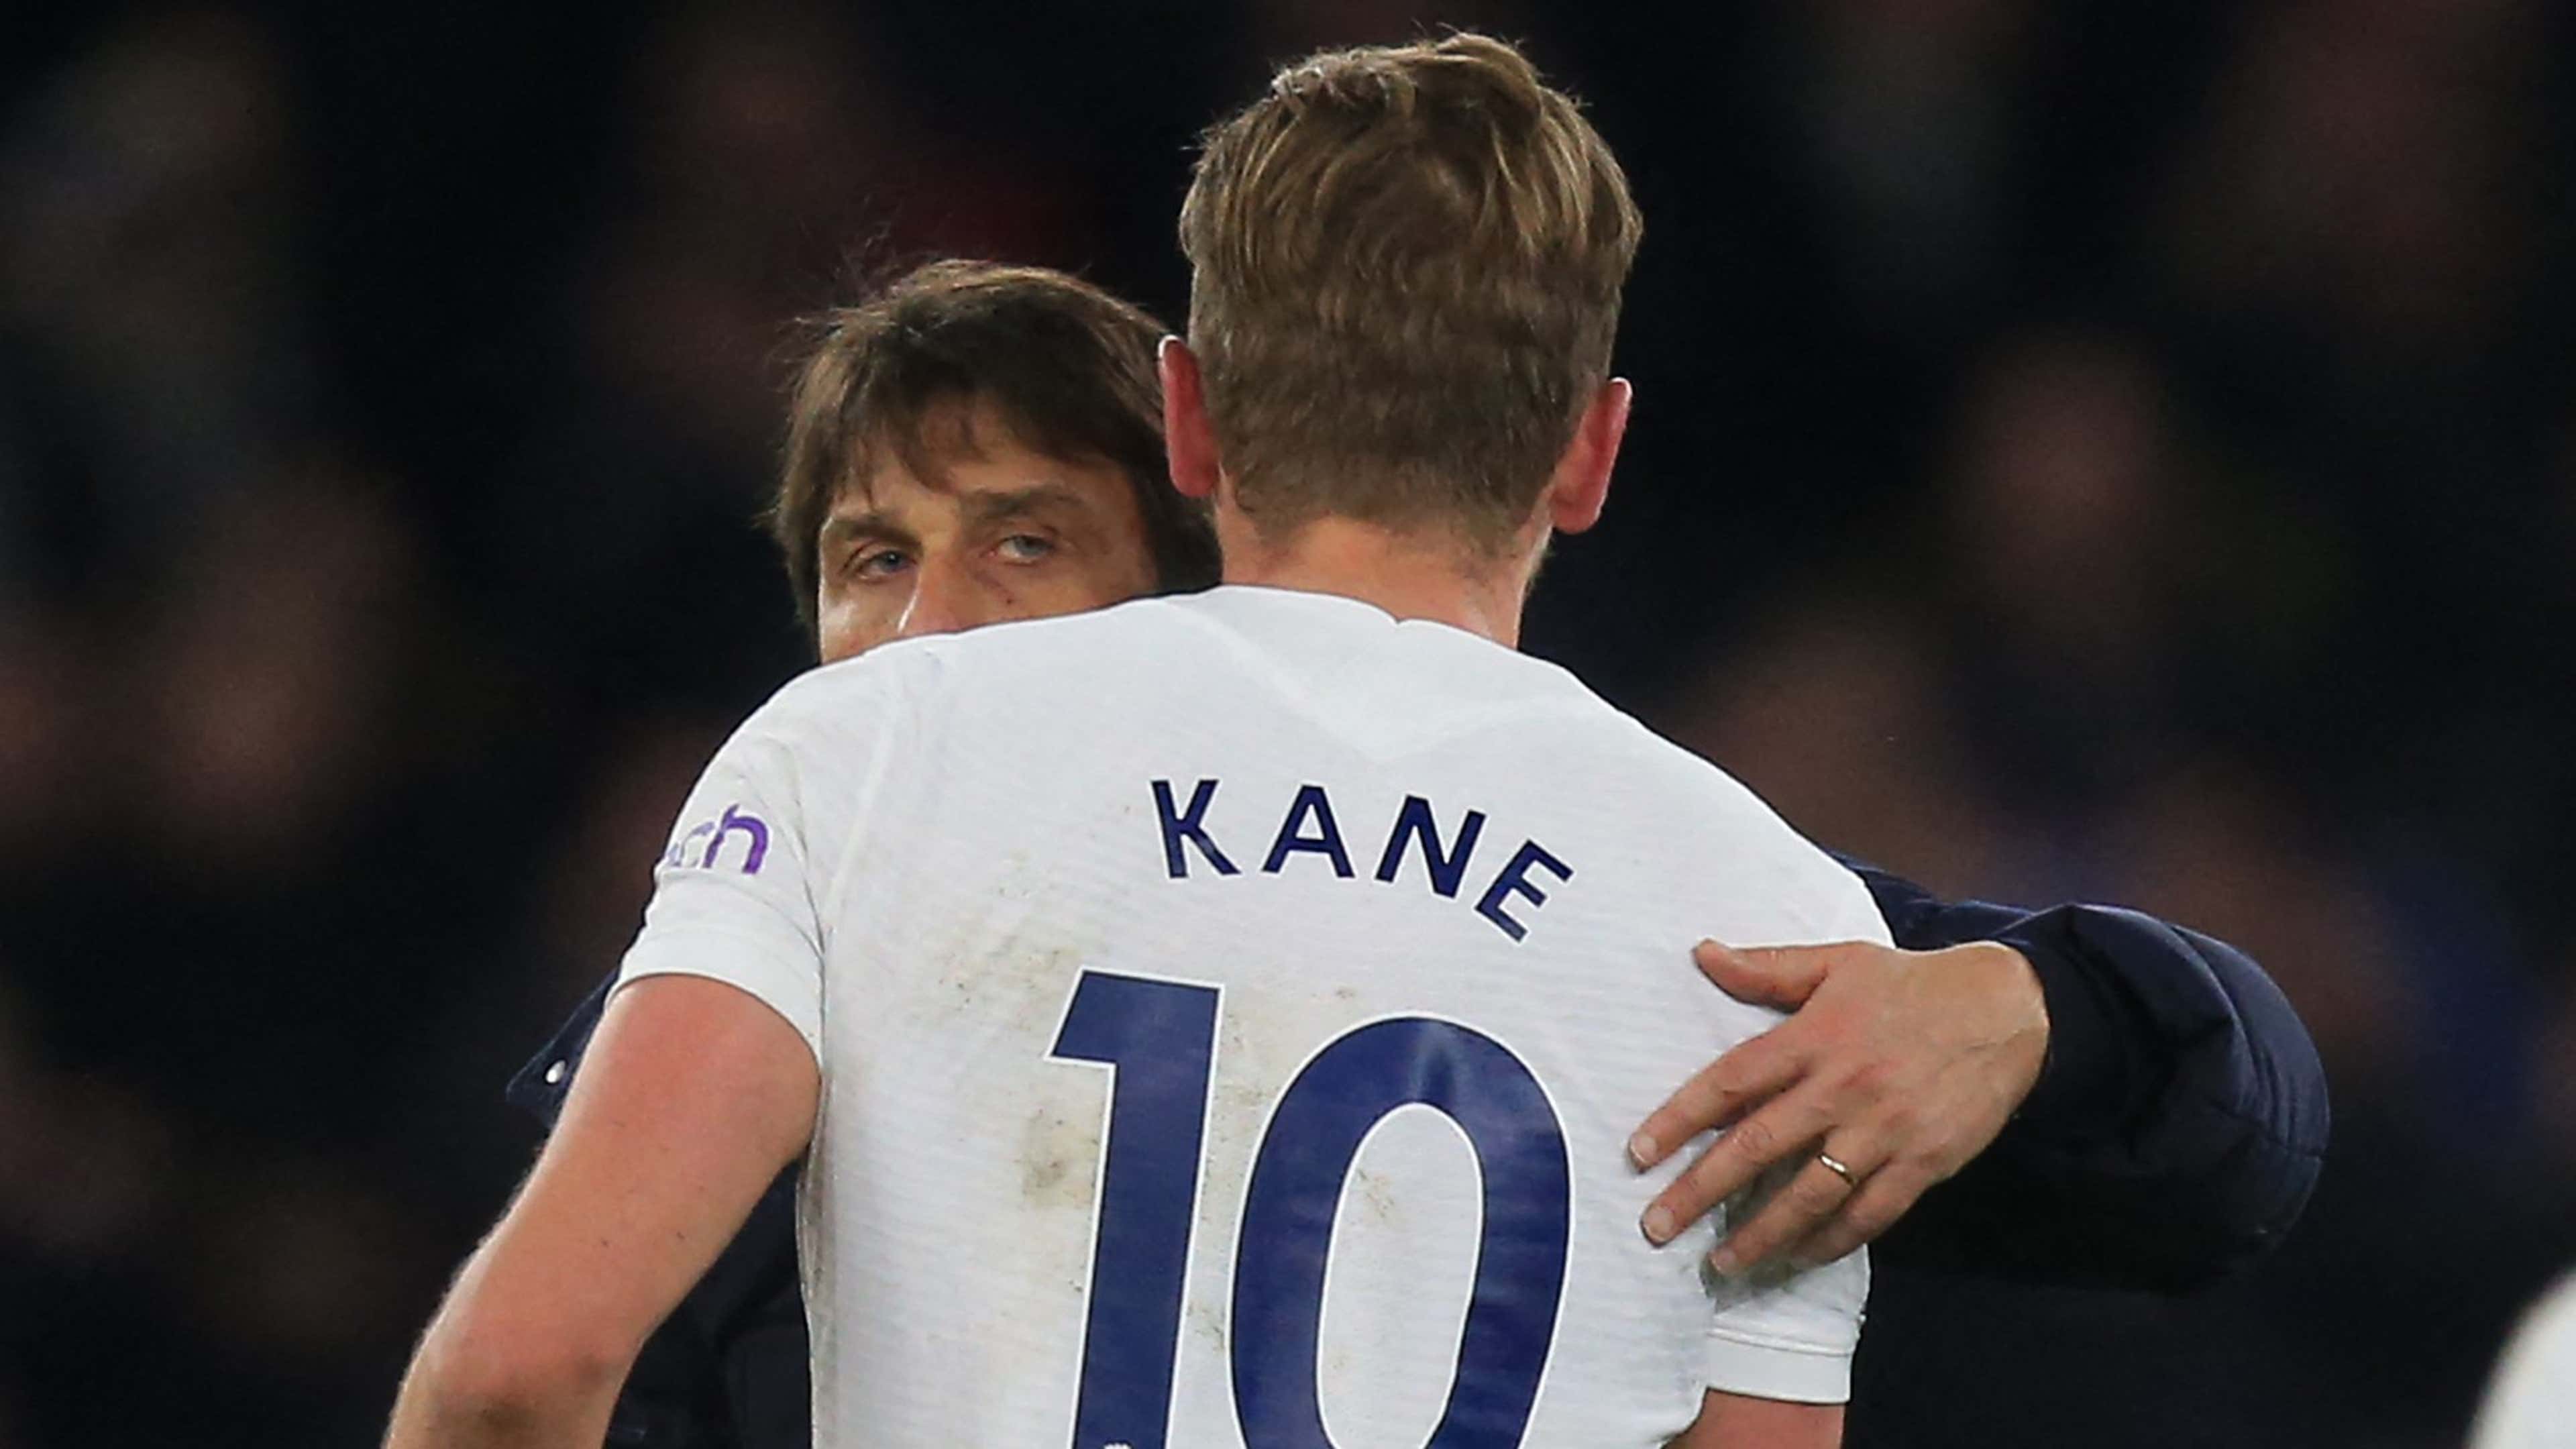 Harry Kane snubbed wearing Tottenham's No 9 shirt in favour of 'special'  number - Daily Star